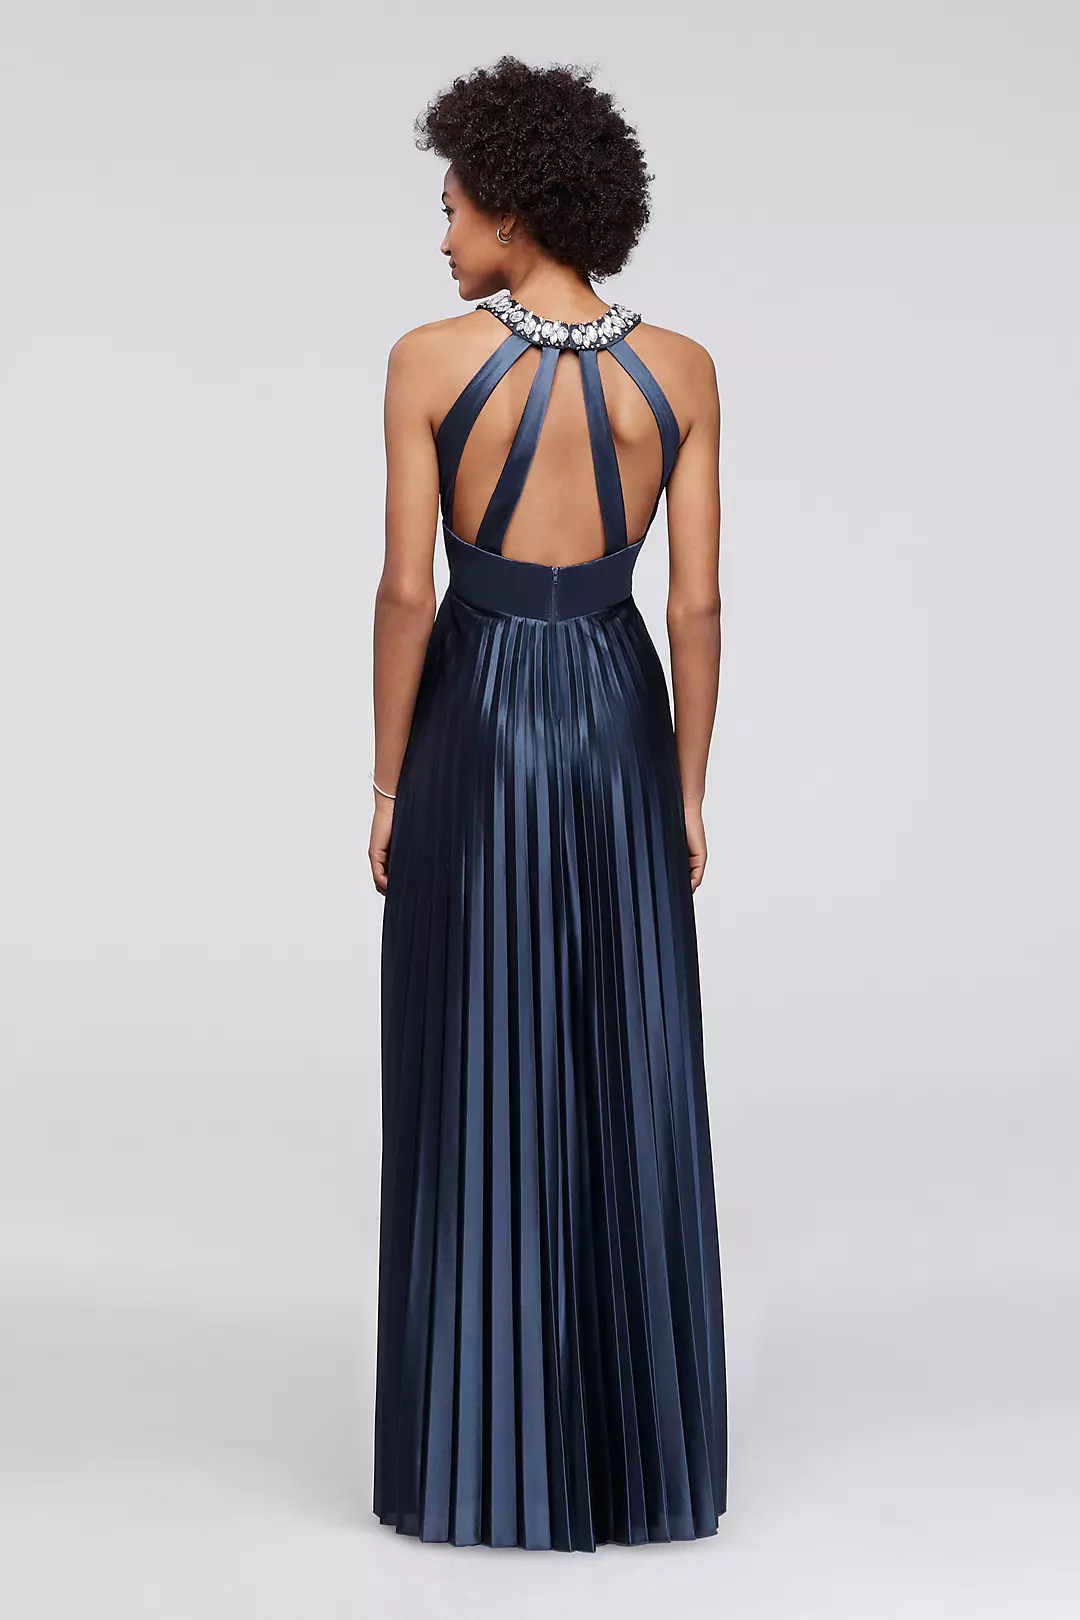 Beaded Strappy Back Halter Prom Dress with Pleats Image 2